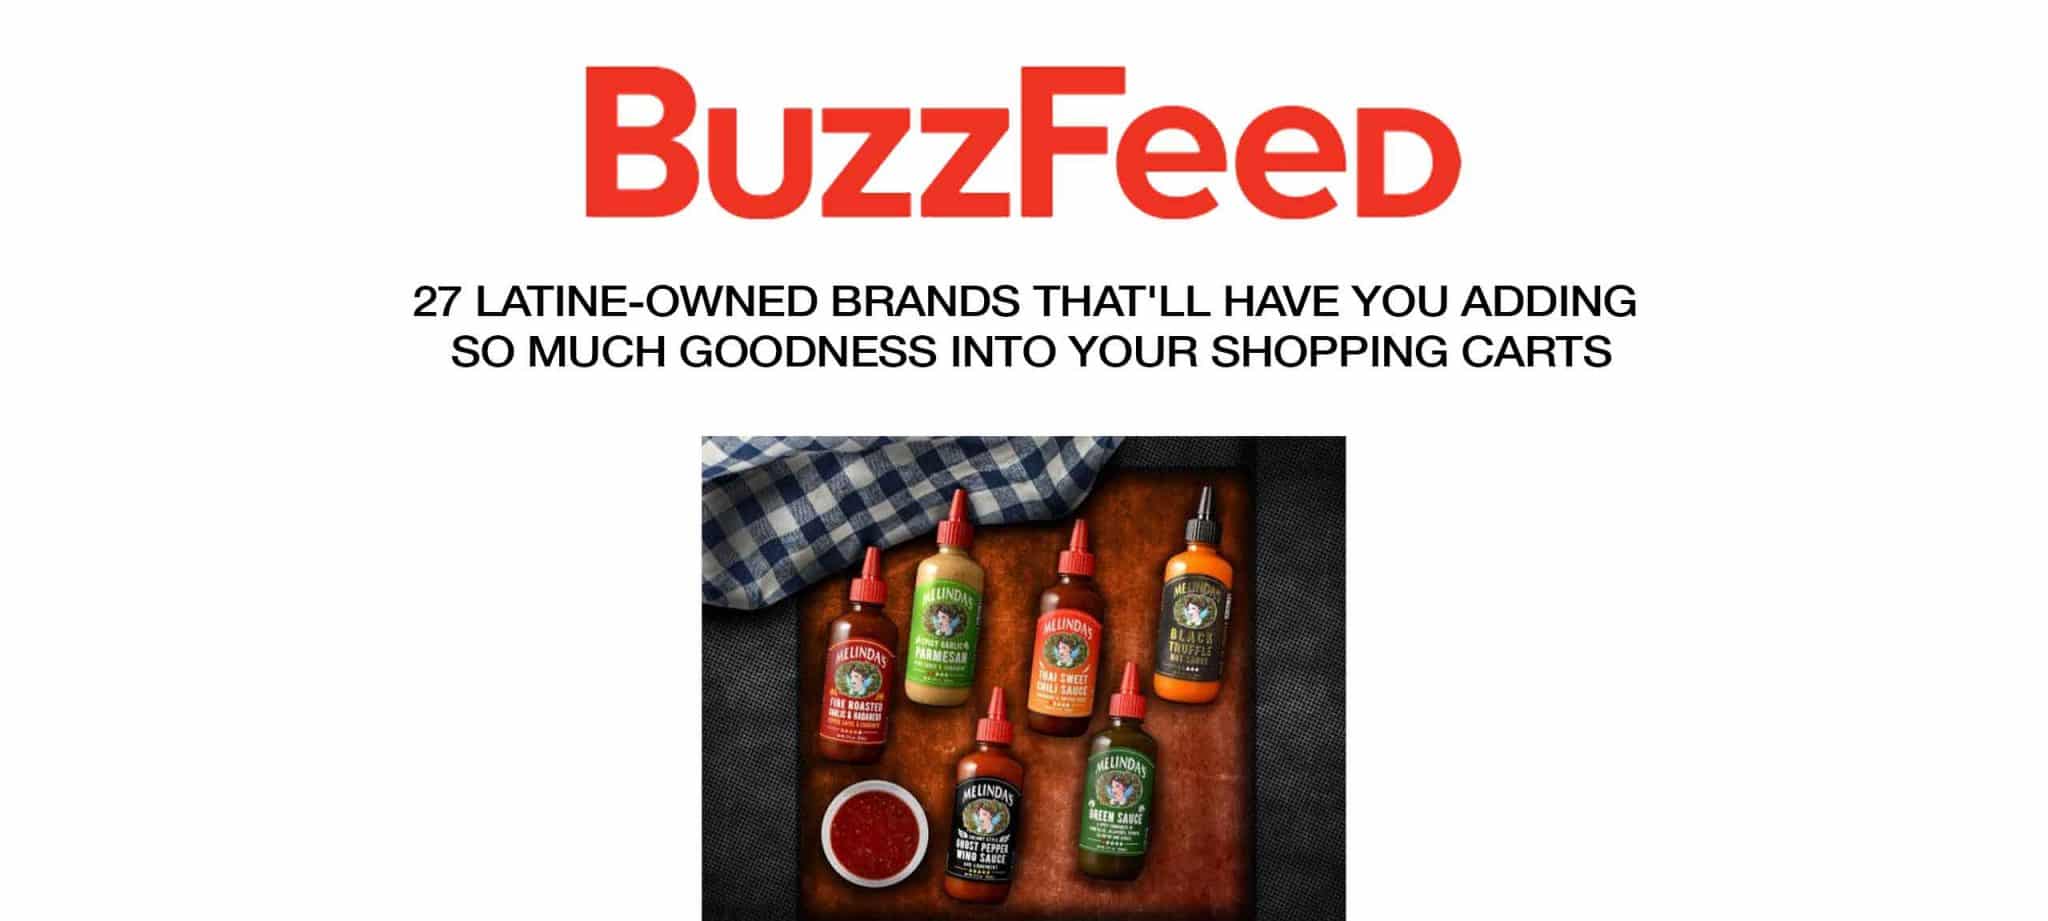 27 Latine-Owned Brands That'll Have You Adding So Much Goodness Into Your Shopping Carts | Says BuzzFeed